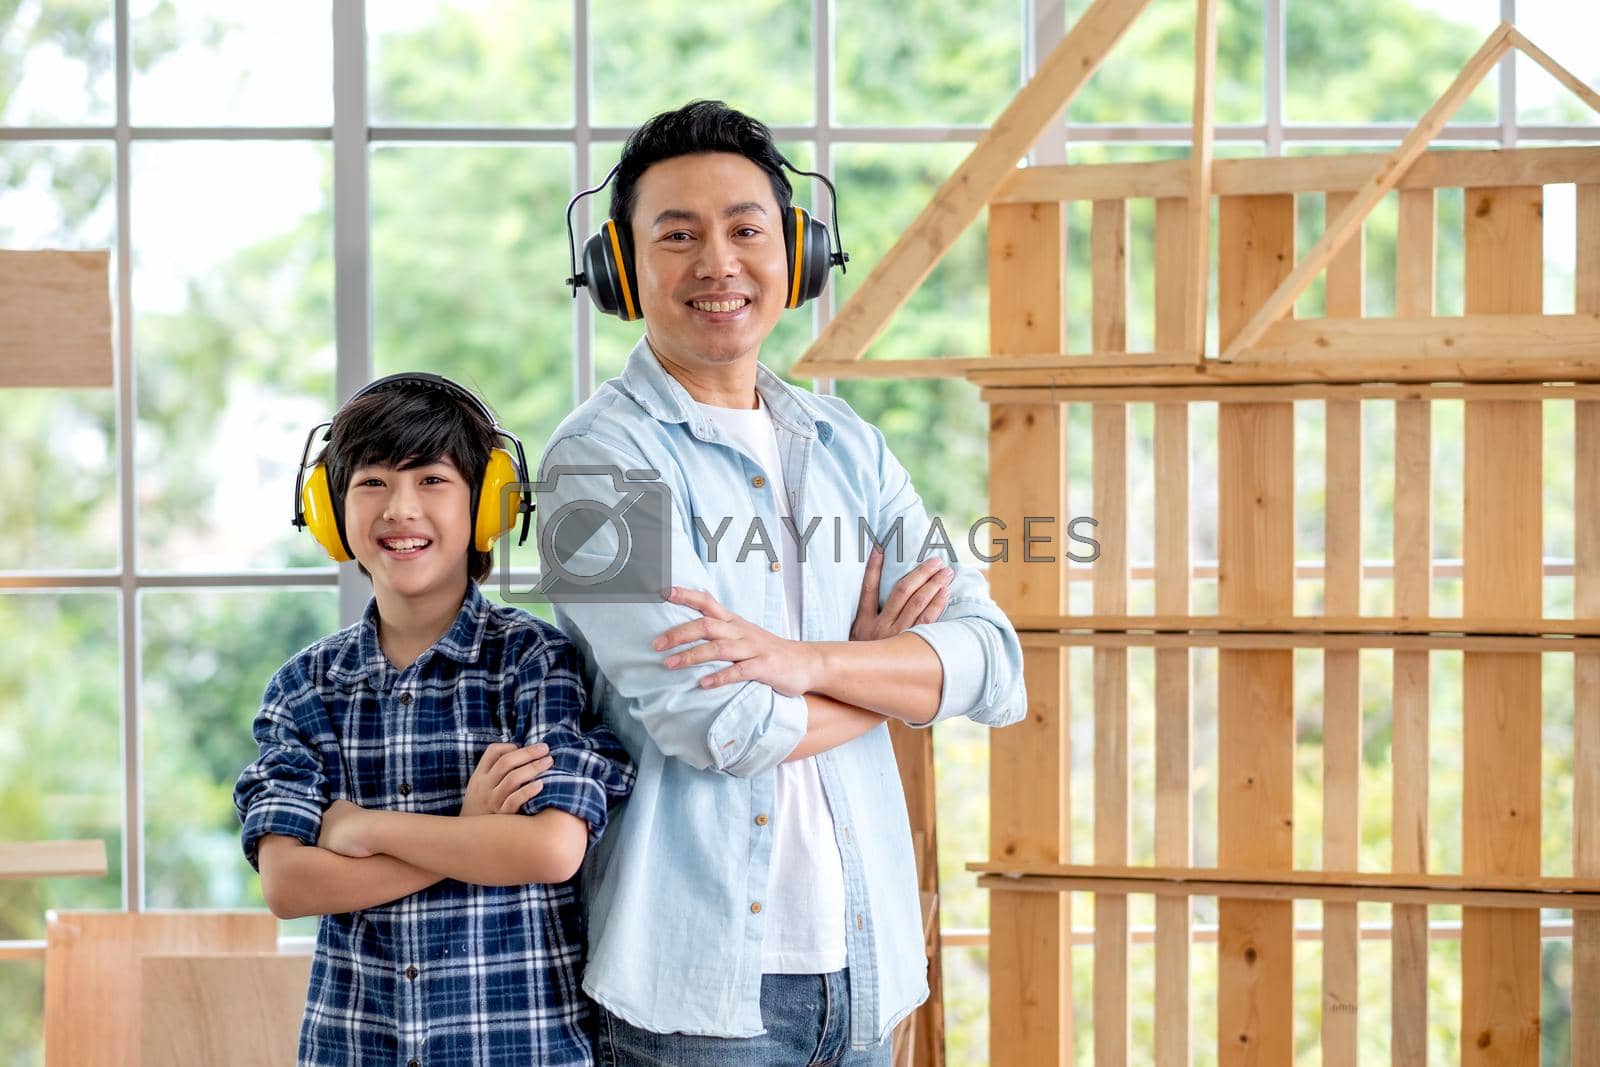 Royalty free image of Portrait of Asian father and boy with mechanic headphone stand in front of woodwork and look at camera. by nrradmin